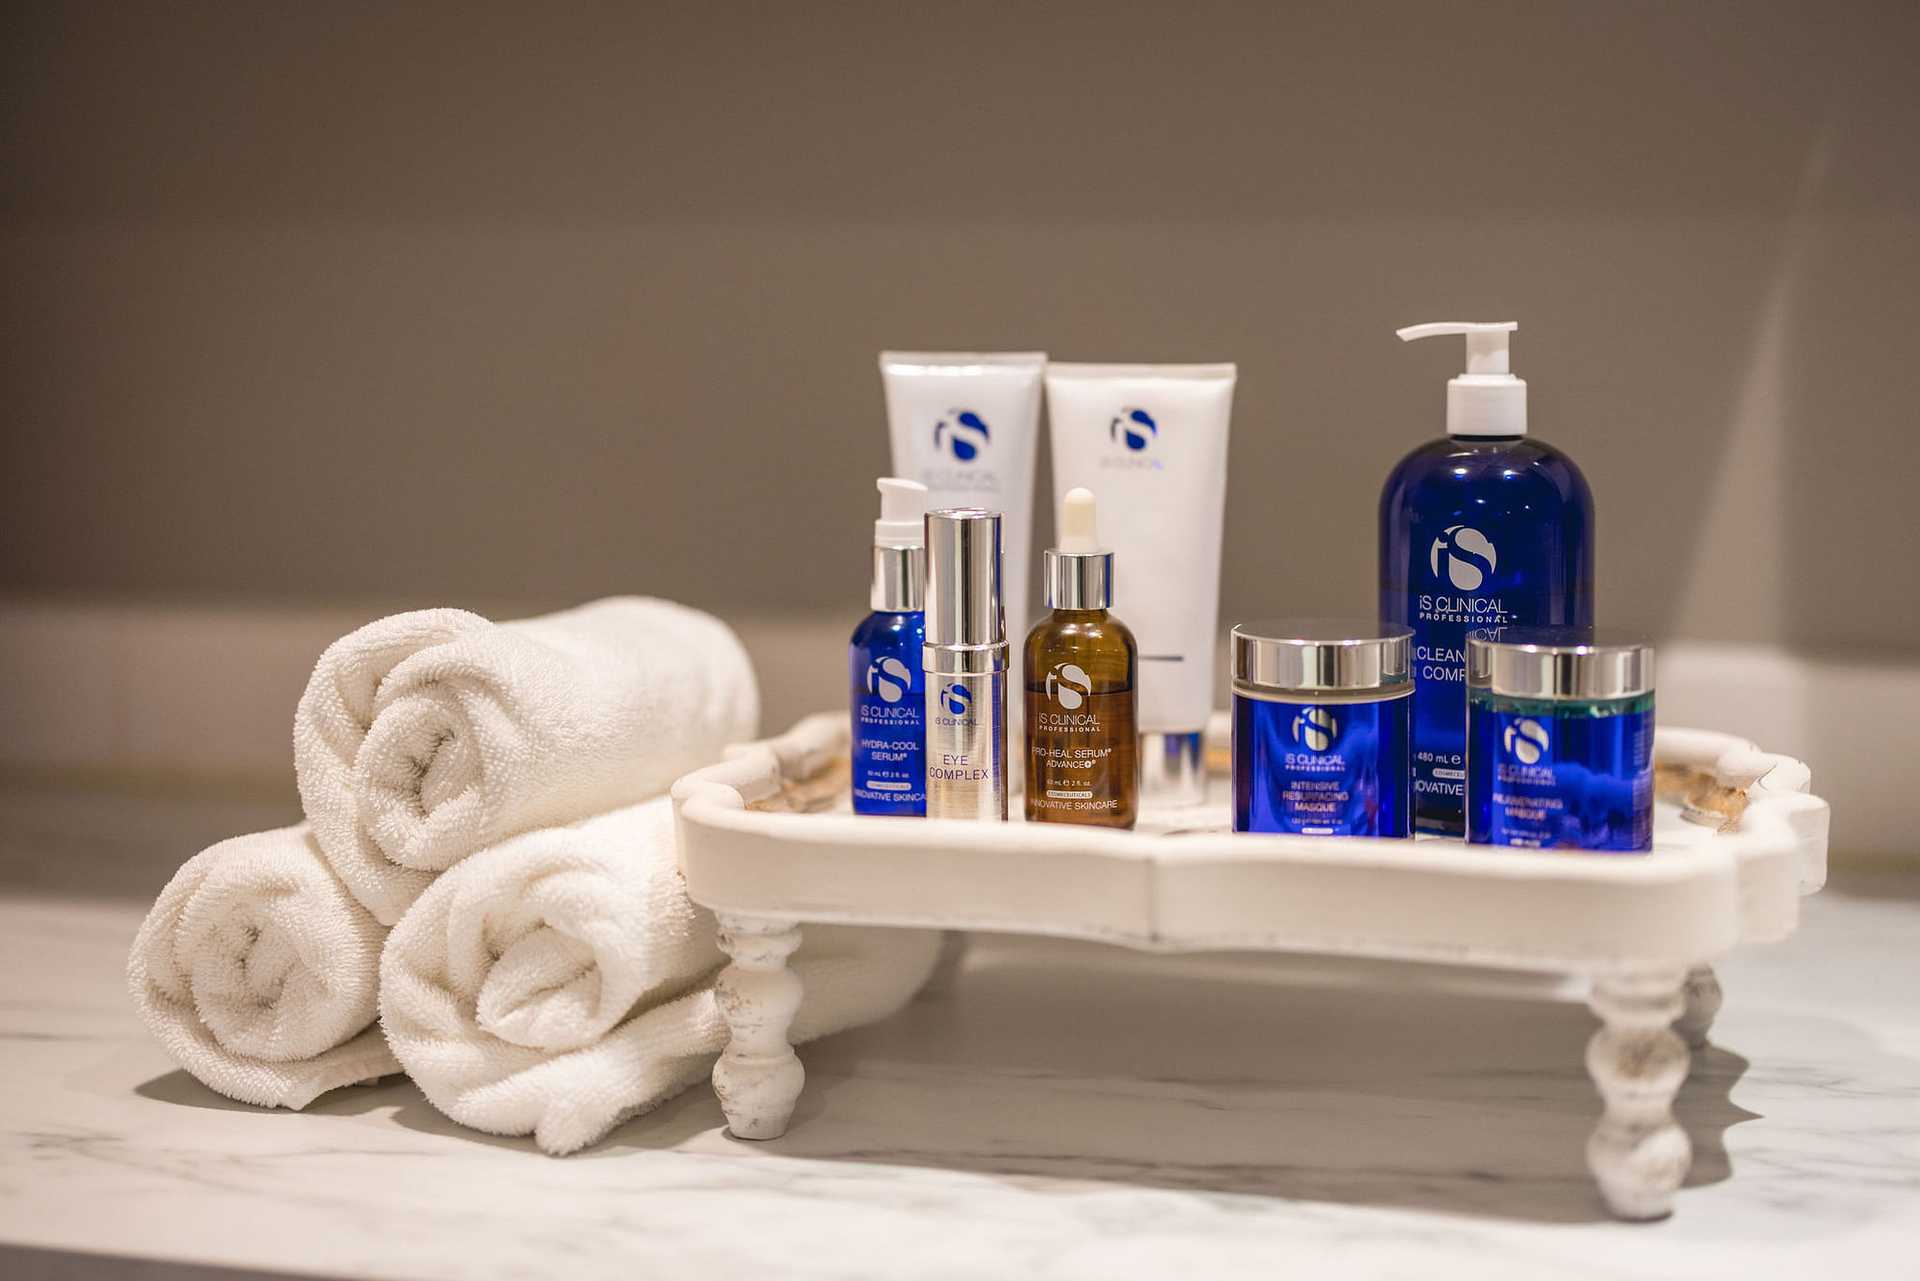 White towel rolls and luxury skincare products on a tray, arranged neatly on a marble countertop.